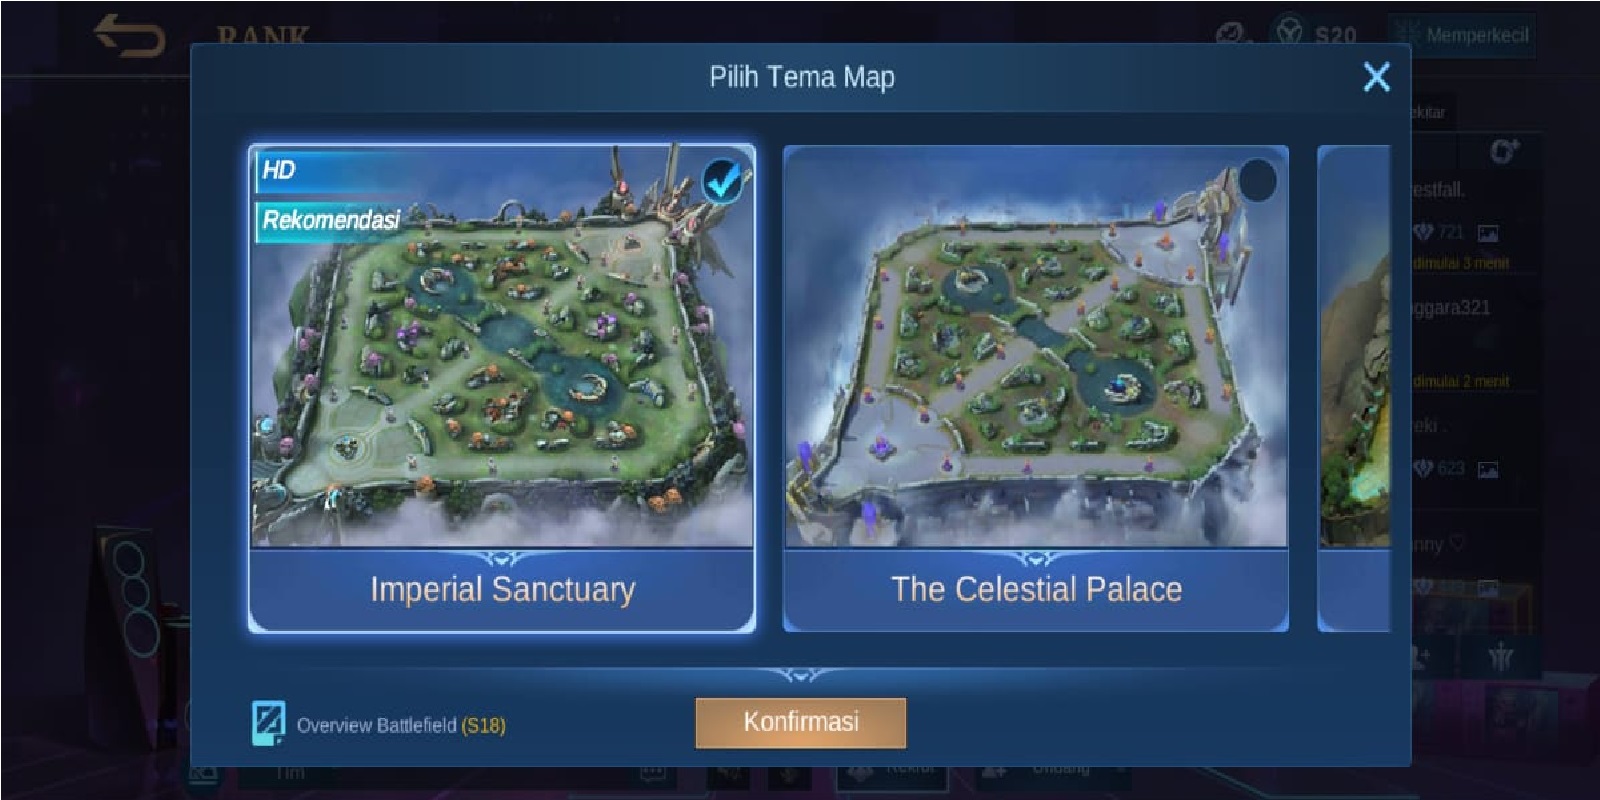 These are the names of 3 maps in Mobile Legends (ML) - Esports